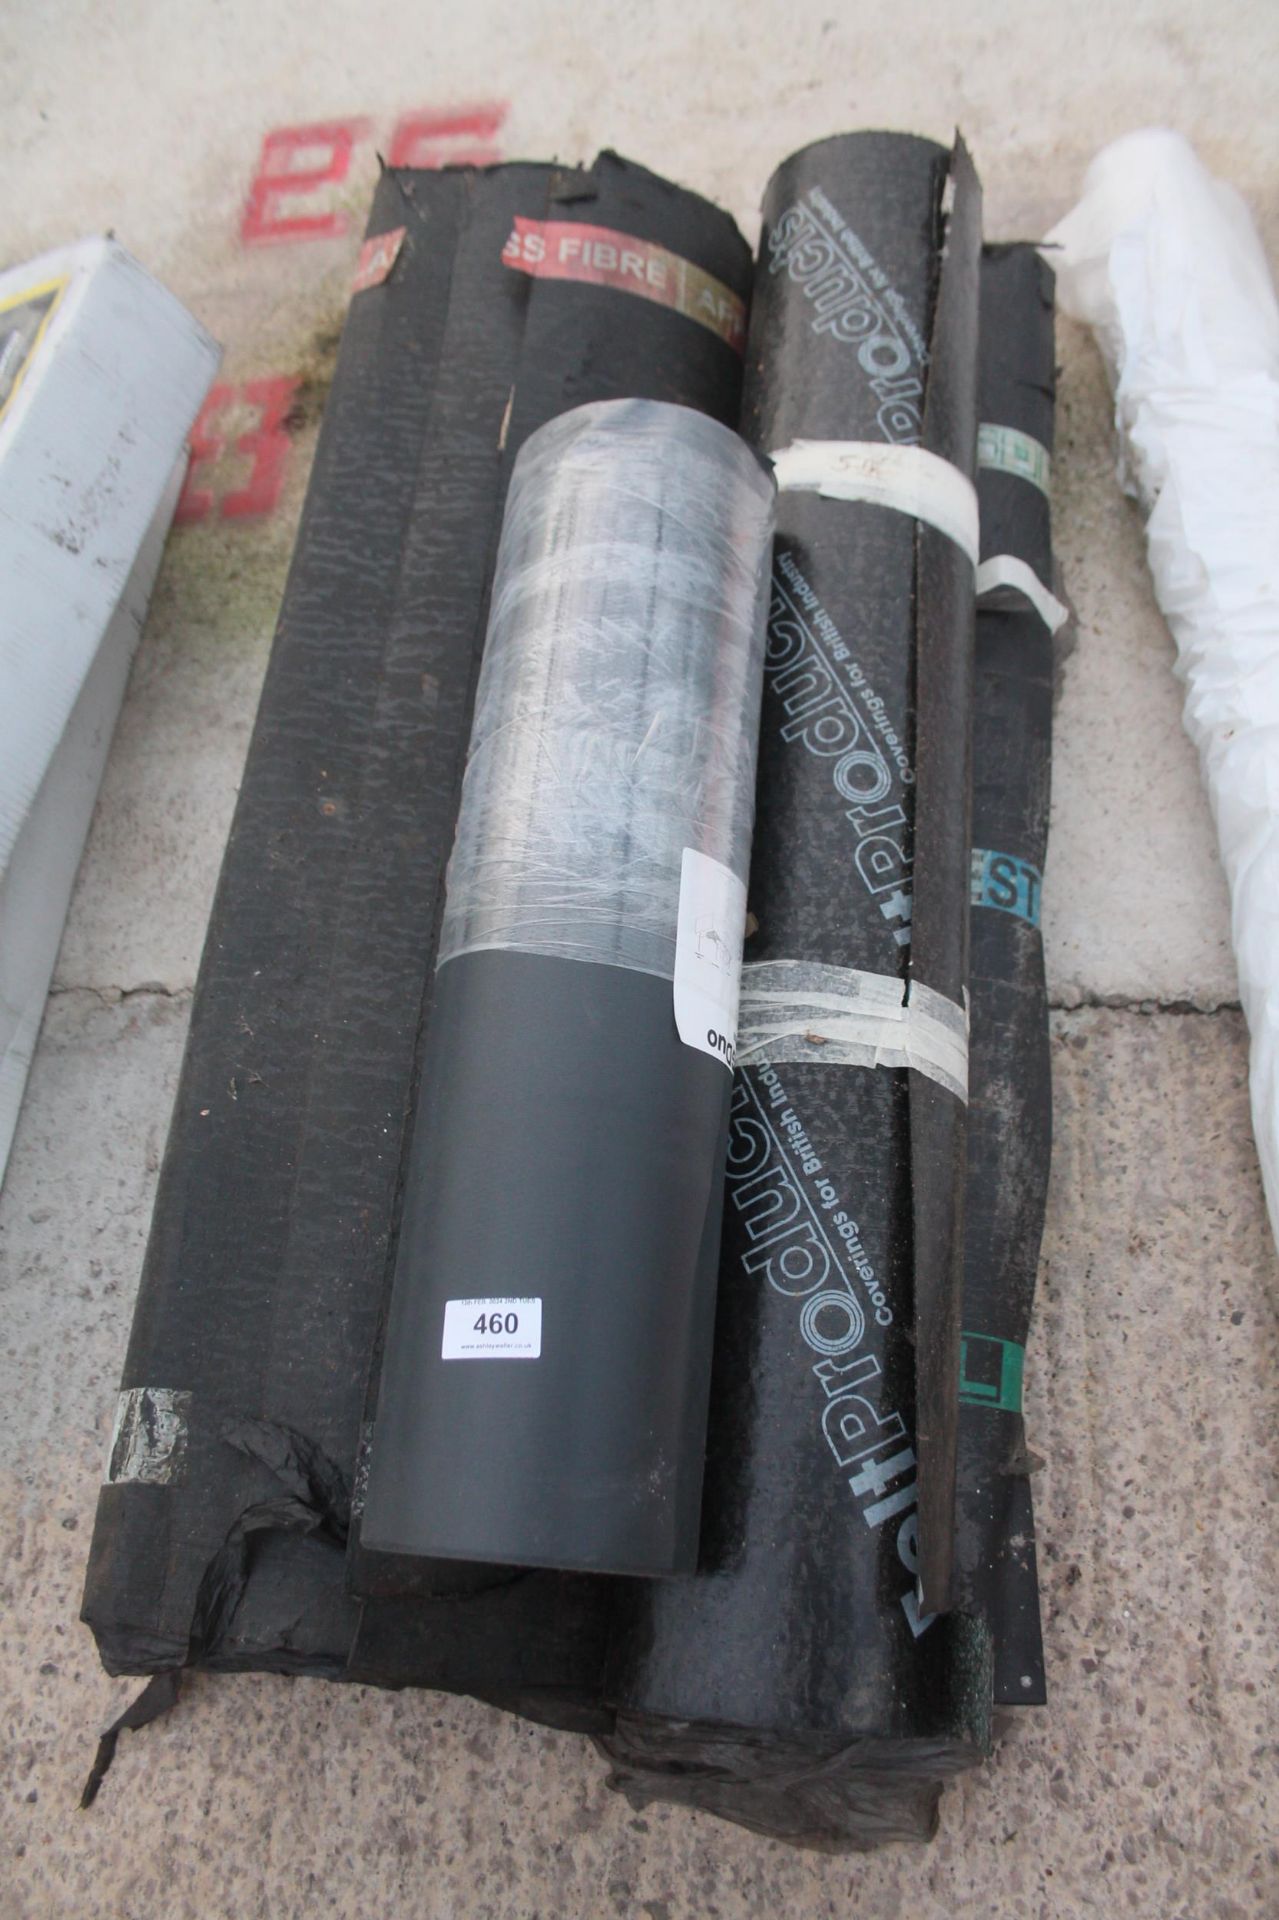 4 ROLLS OF FELT AND 1 ROLL OF DAMP COURSE + VAT